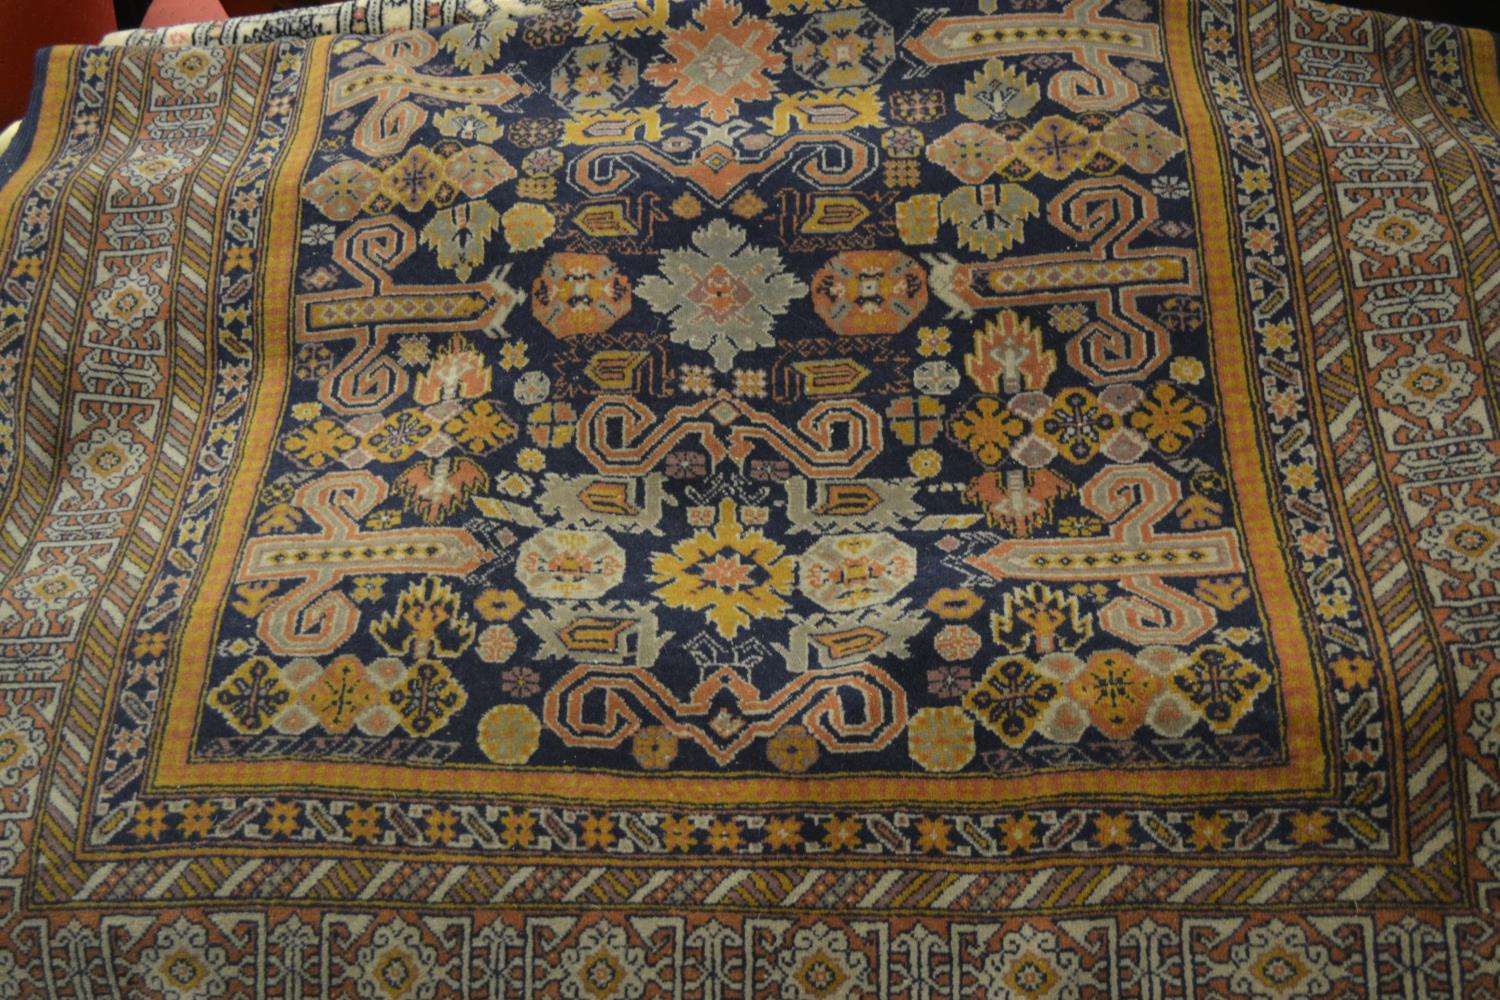 Turkish rug of Caucasian design with an all-over stylised floral and rams head design on a